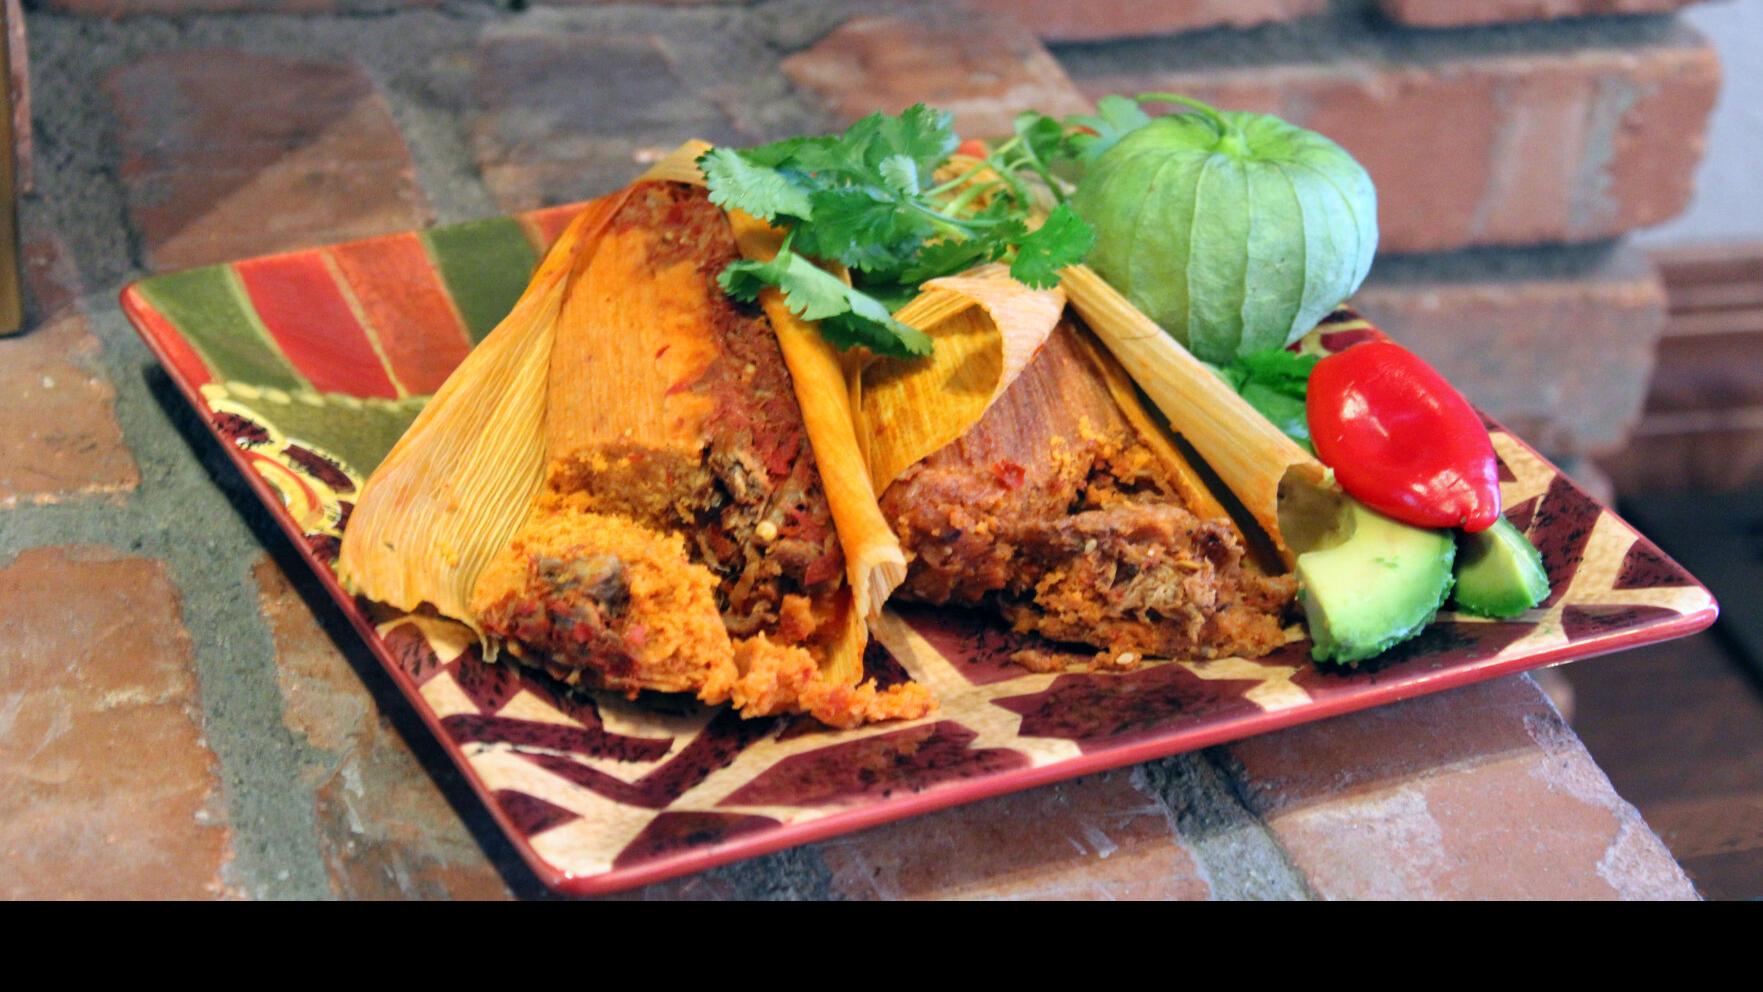 Matters of Taste: Tamales USA offers made-from-scratch tamales all season  long, Chow